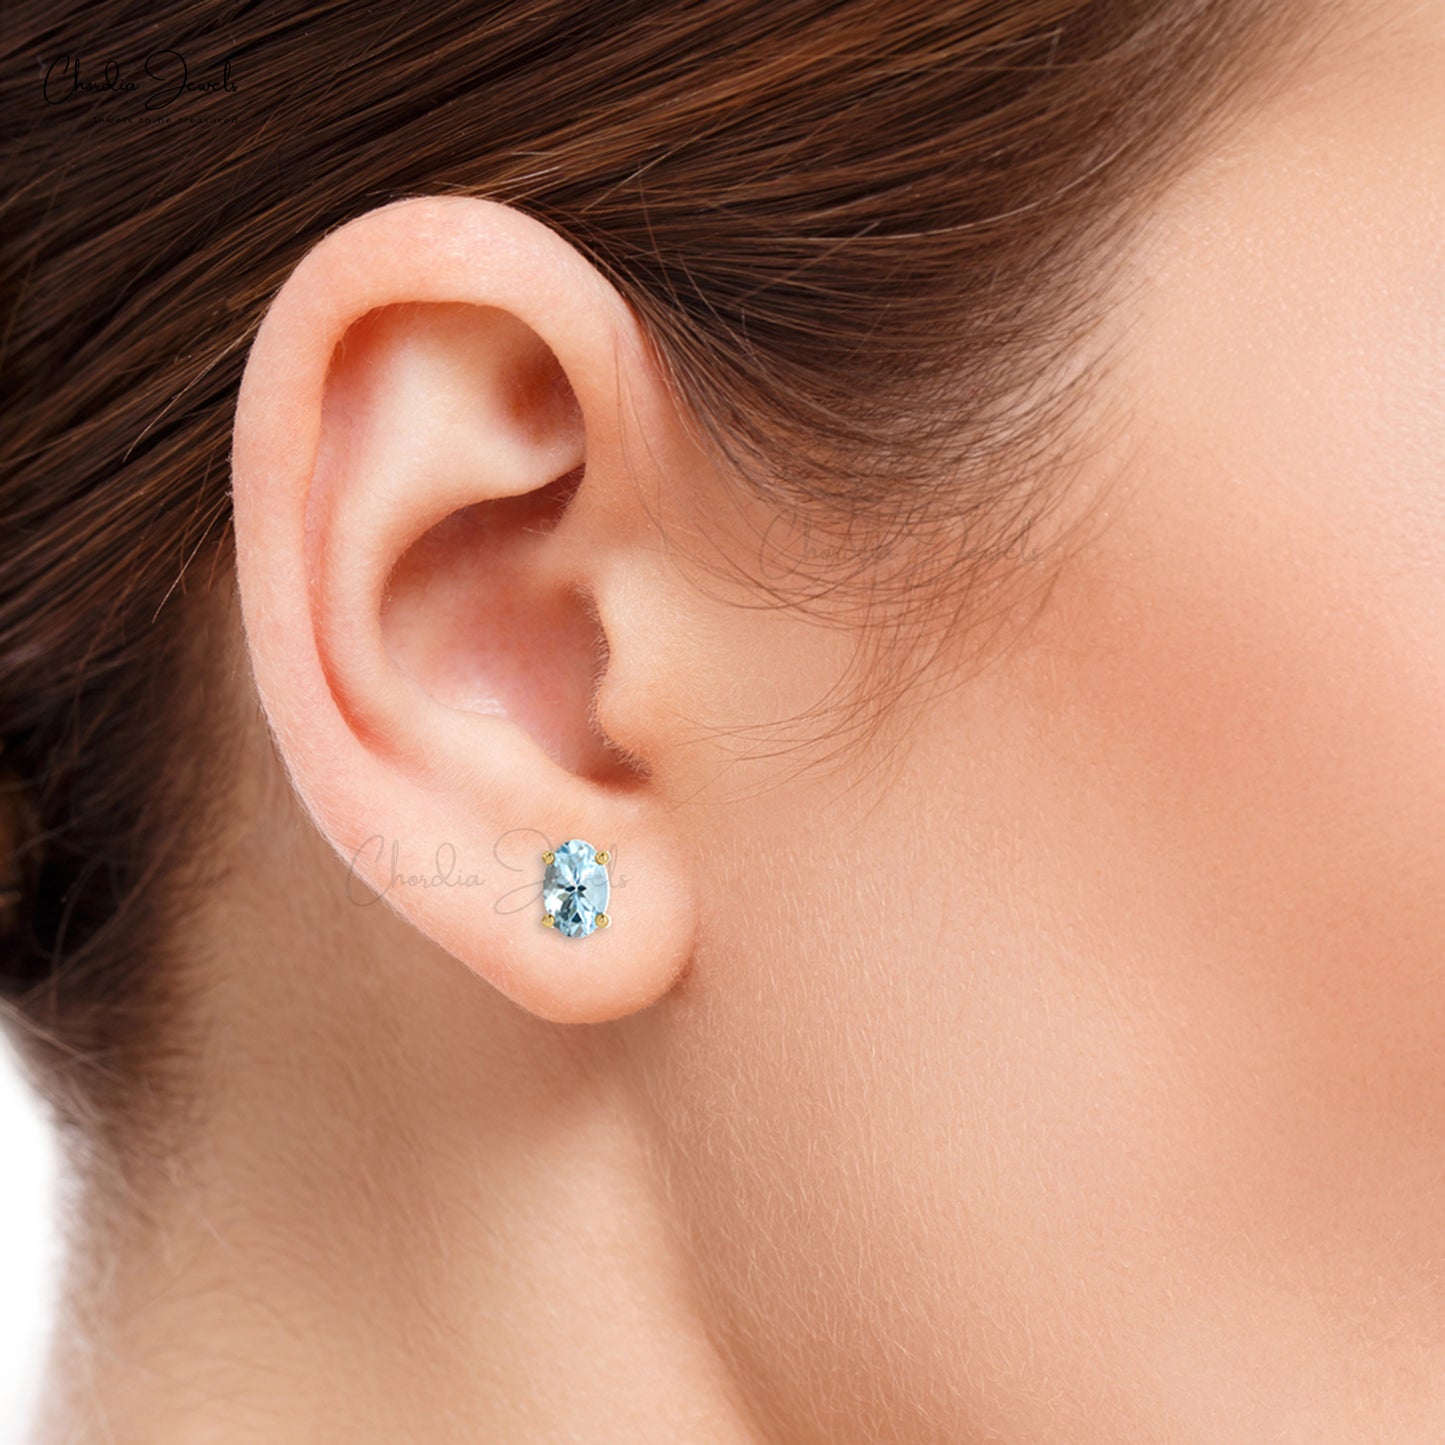 Authentic Aquamarine Solitaire Stud Earrings in 14k Solid Gold Minimalist Earrings